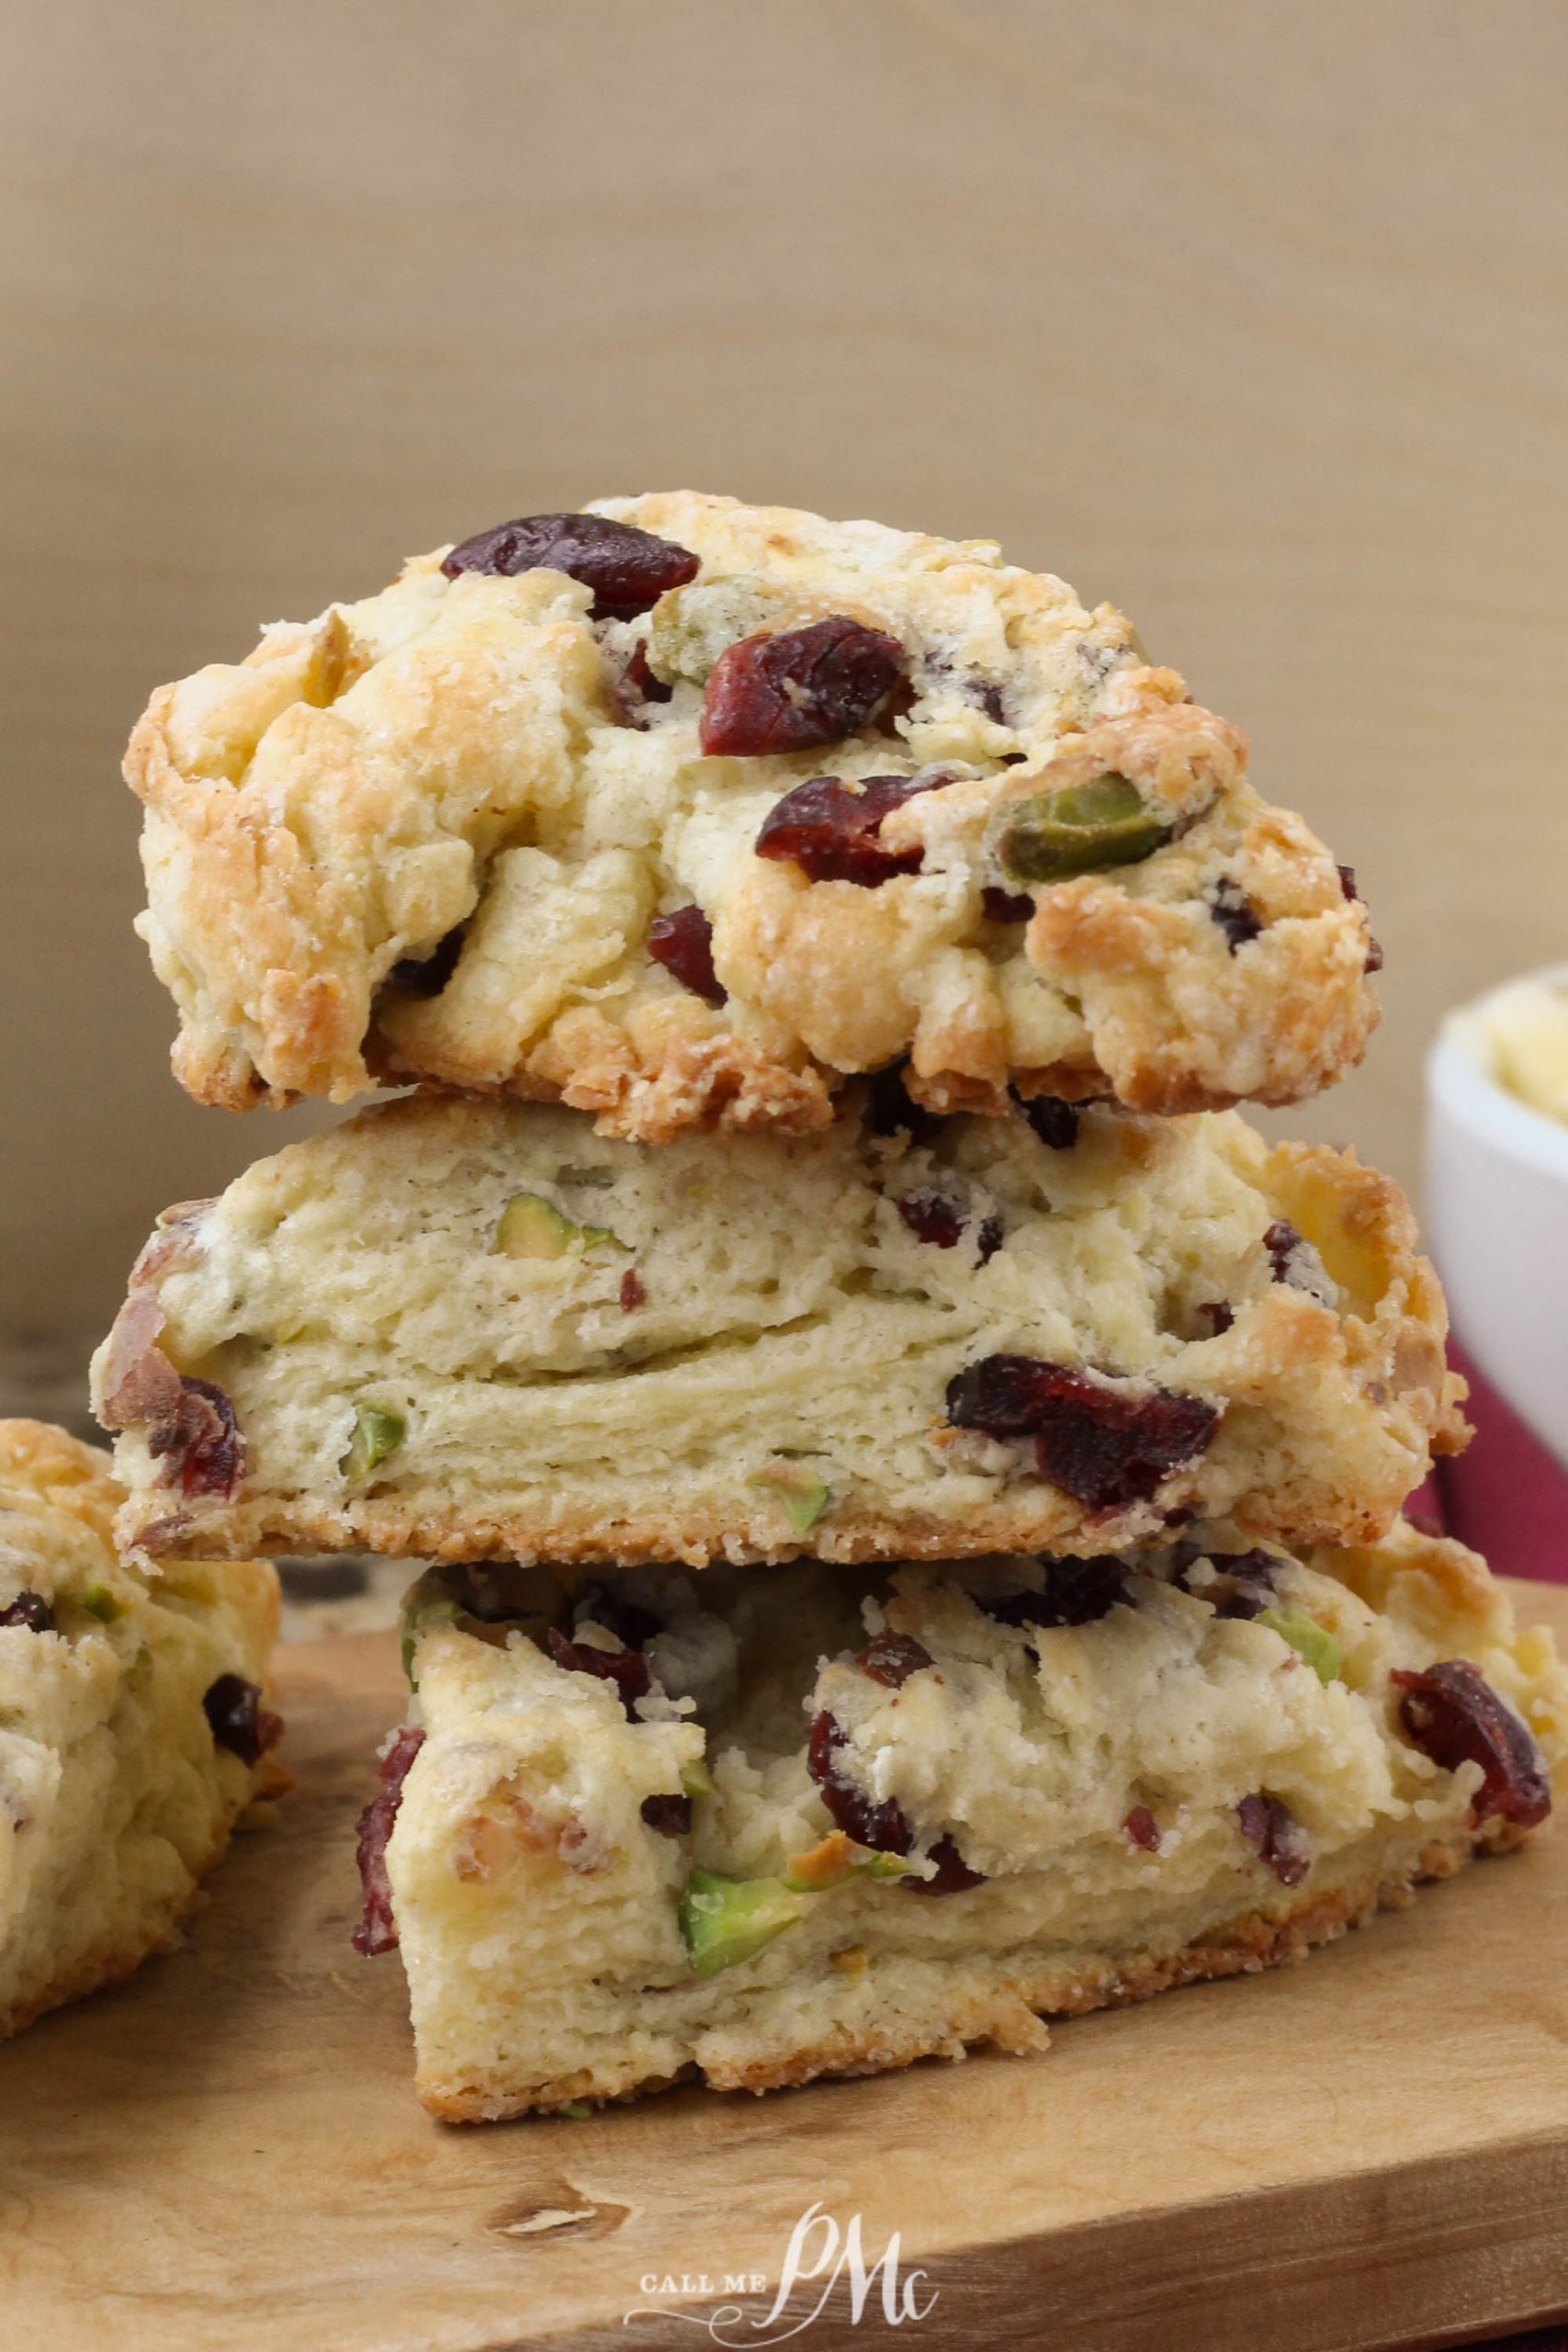 A stack of three Dried Cherry Pistachio Scones on a wooden table, with visible pieces of cranberries and pistachios.